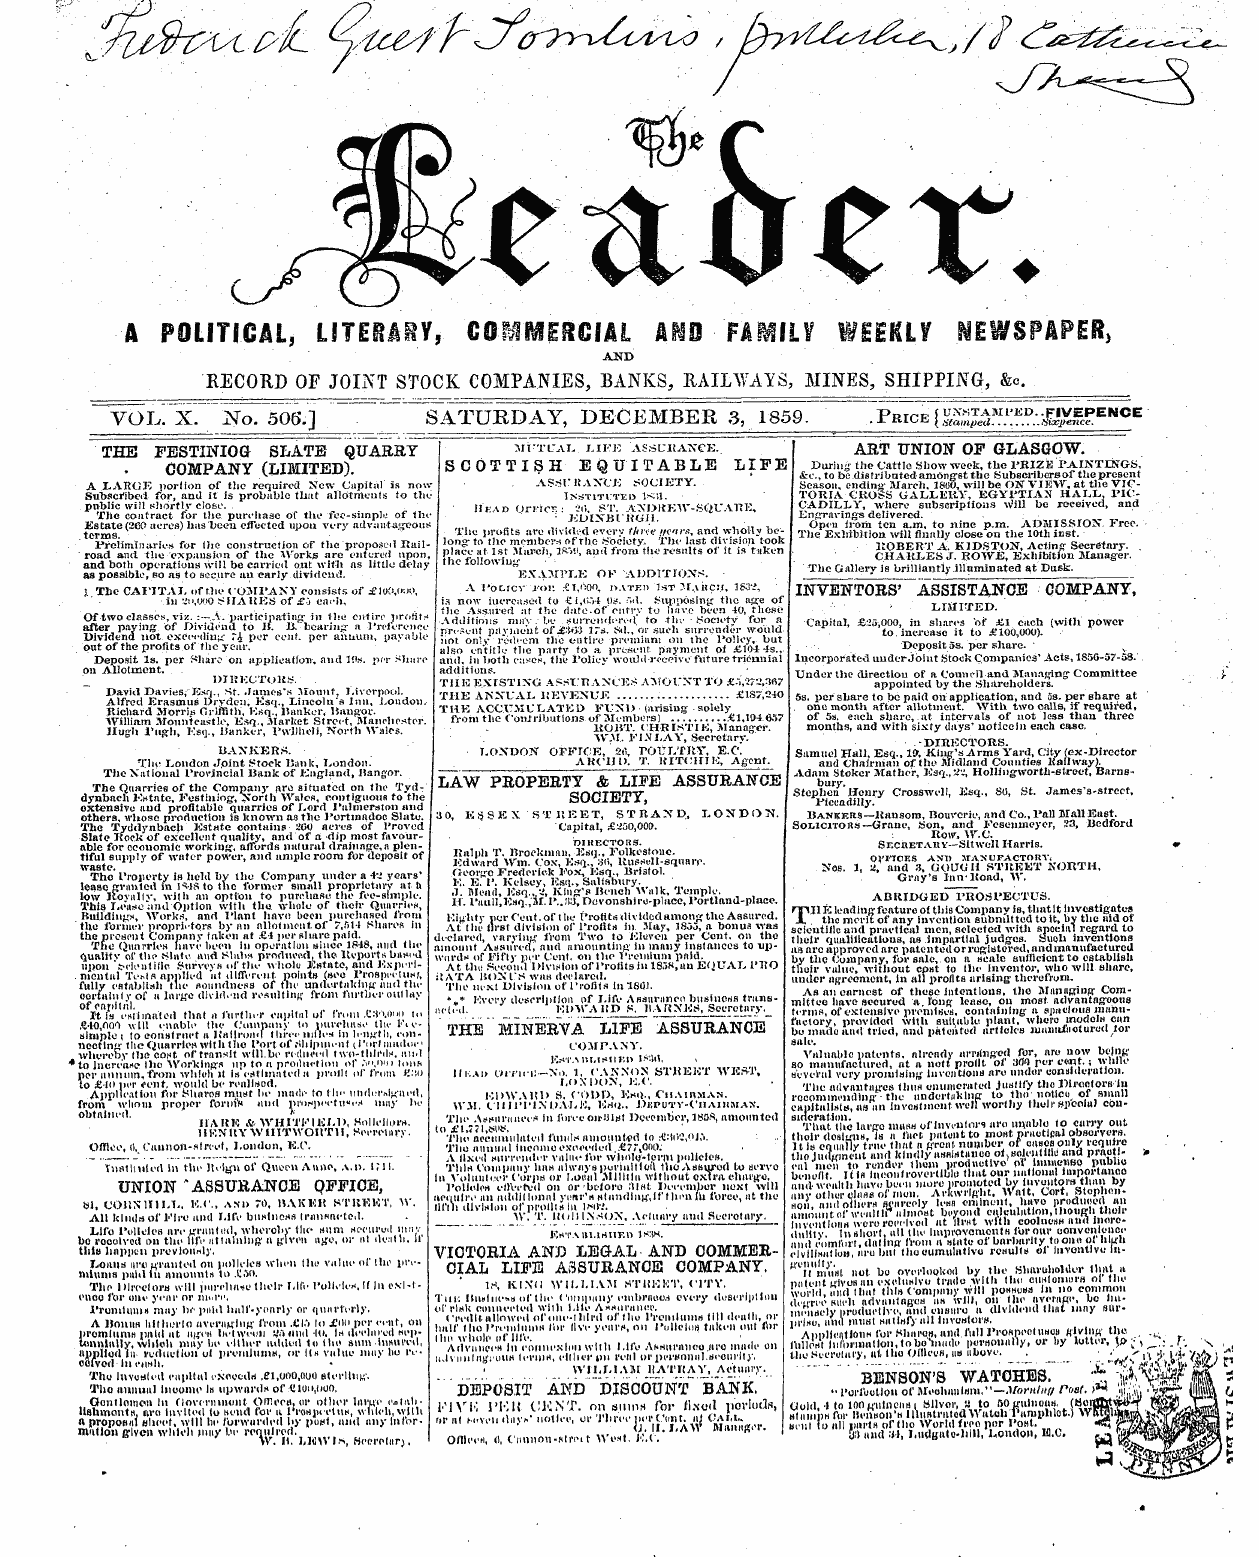 Leader (1850-1860): jS F Y, 2nd edition - Ad00102